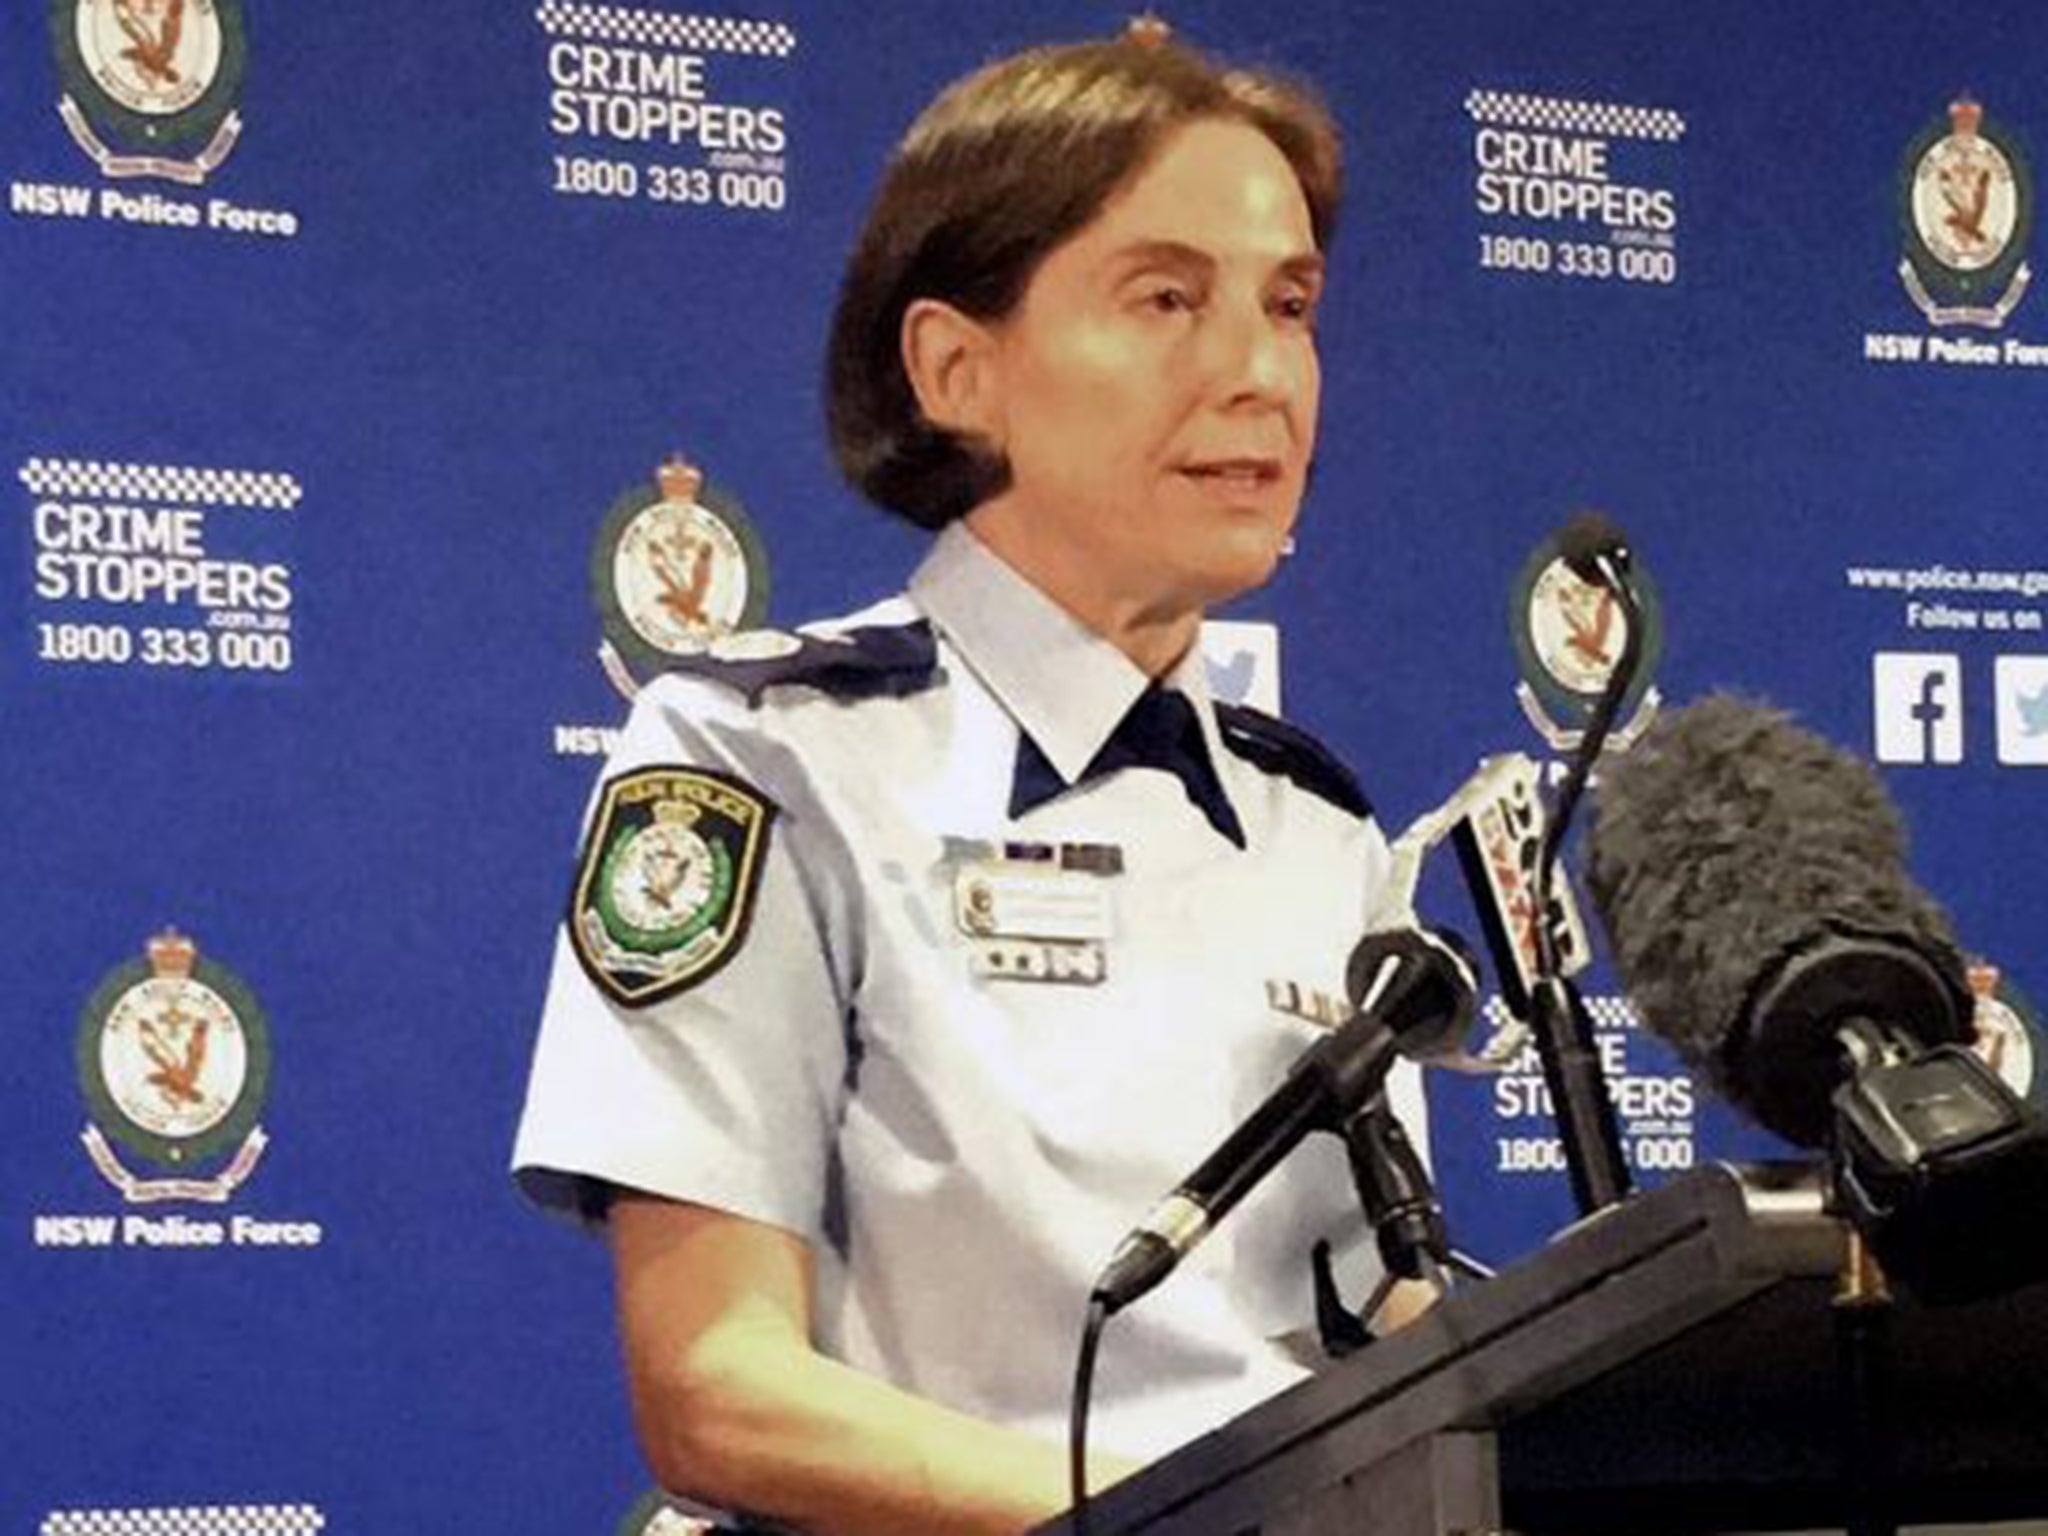 New South Wales Police Deputy Commissioner Catherine Burn said they believe terrorism was the motive for the attack as the suspect and his victim did not know each other